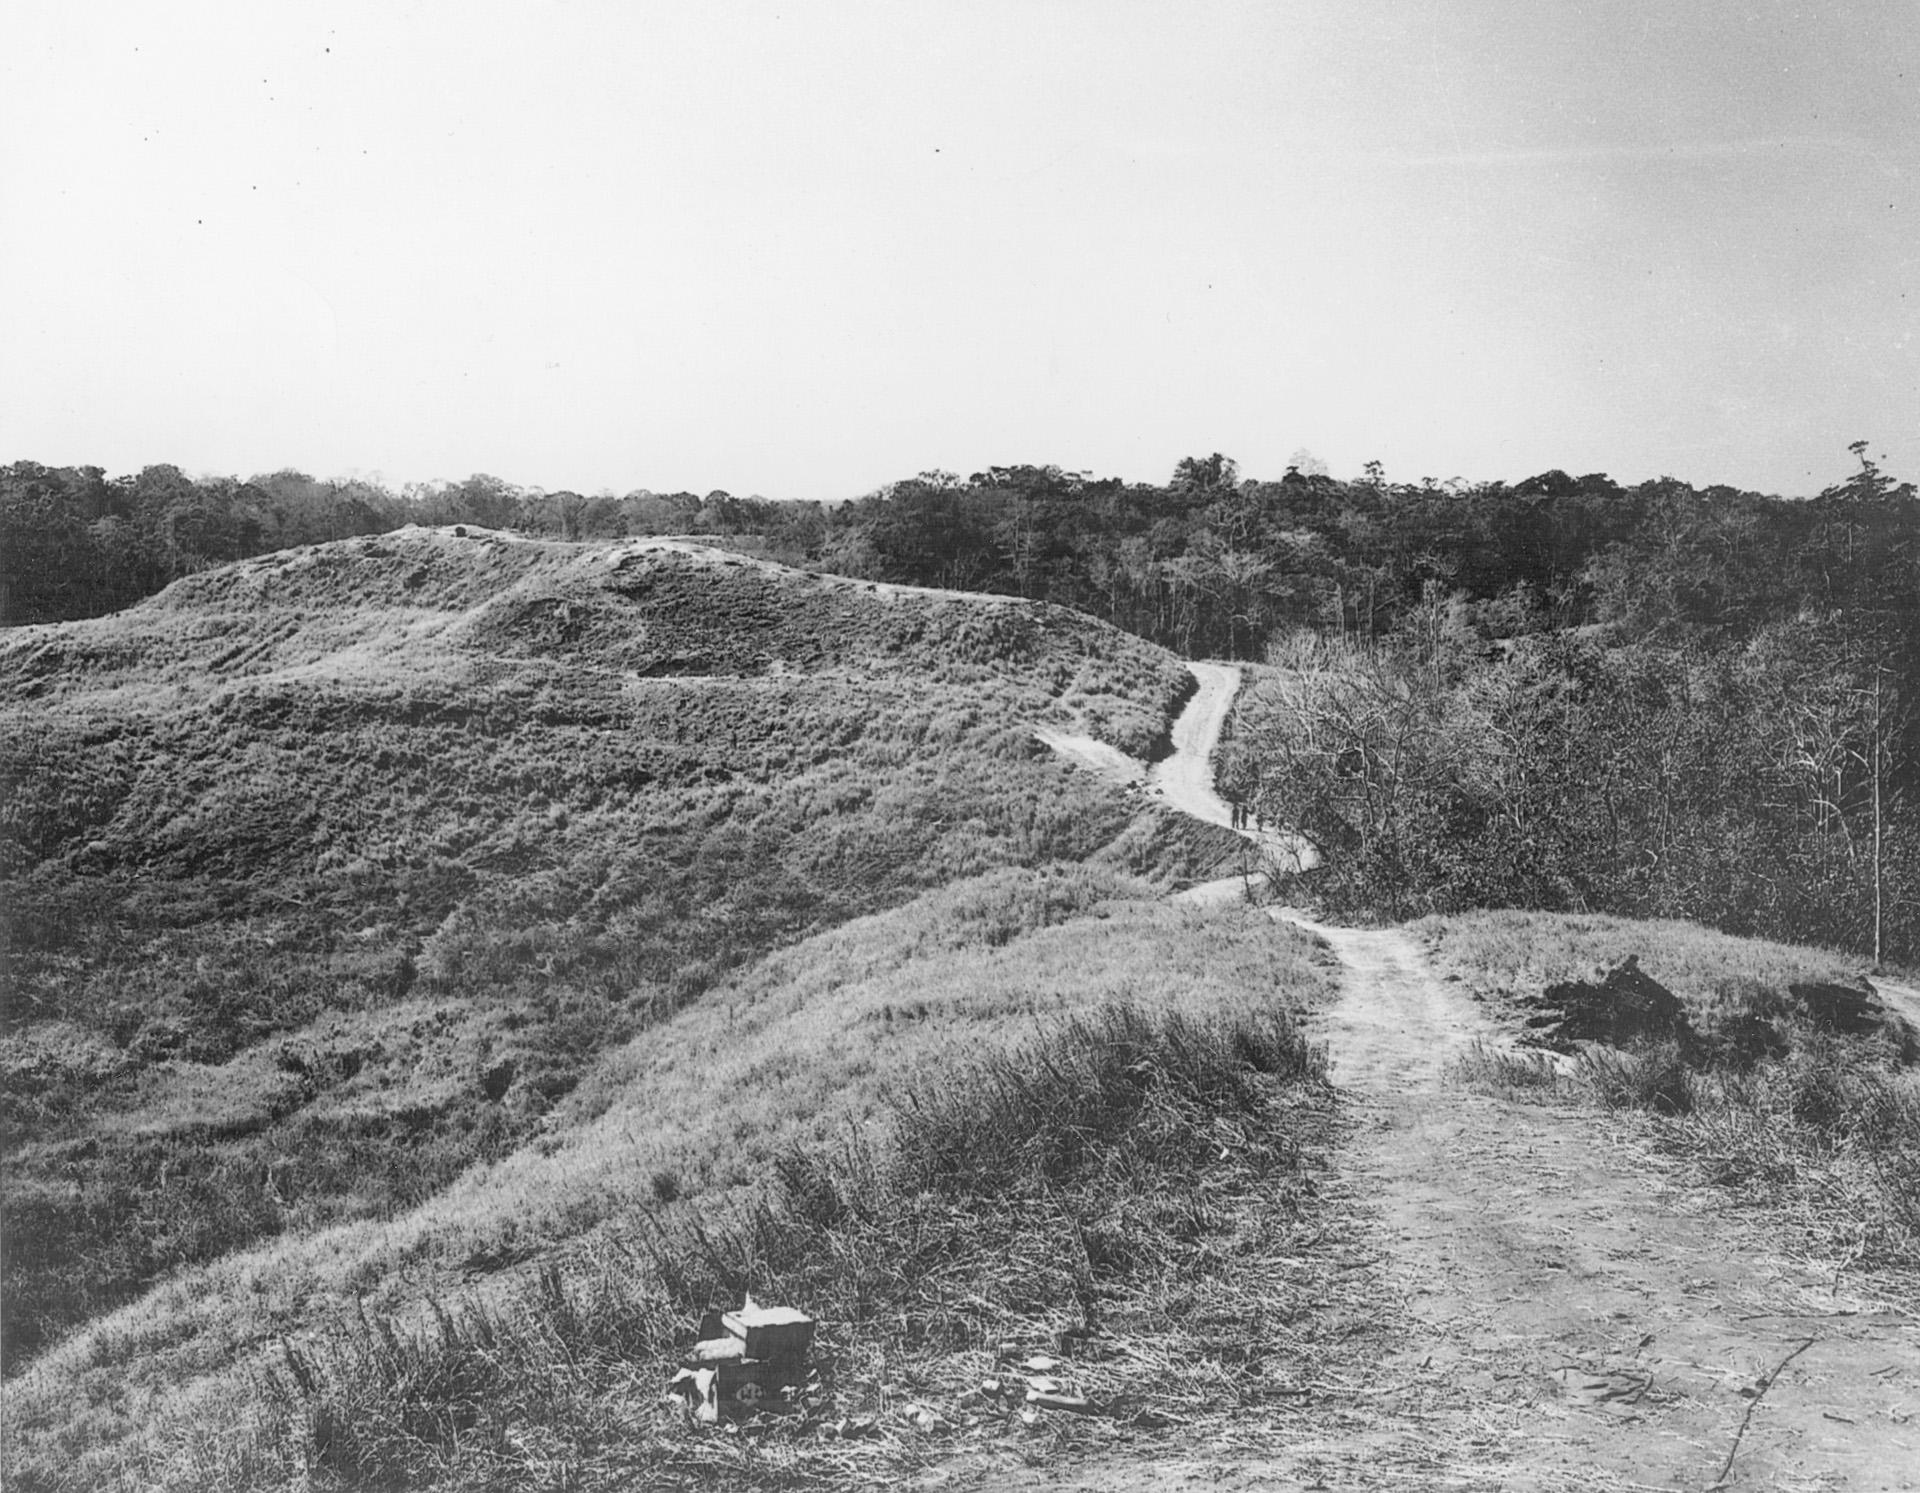 After fierce fighting at Bloody Ridge, Marines come off line, following a winding dirt path across the hills of Guadalcanal. 